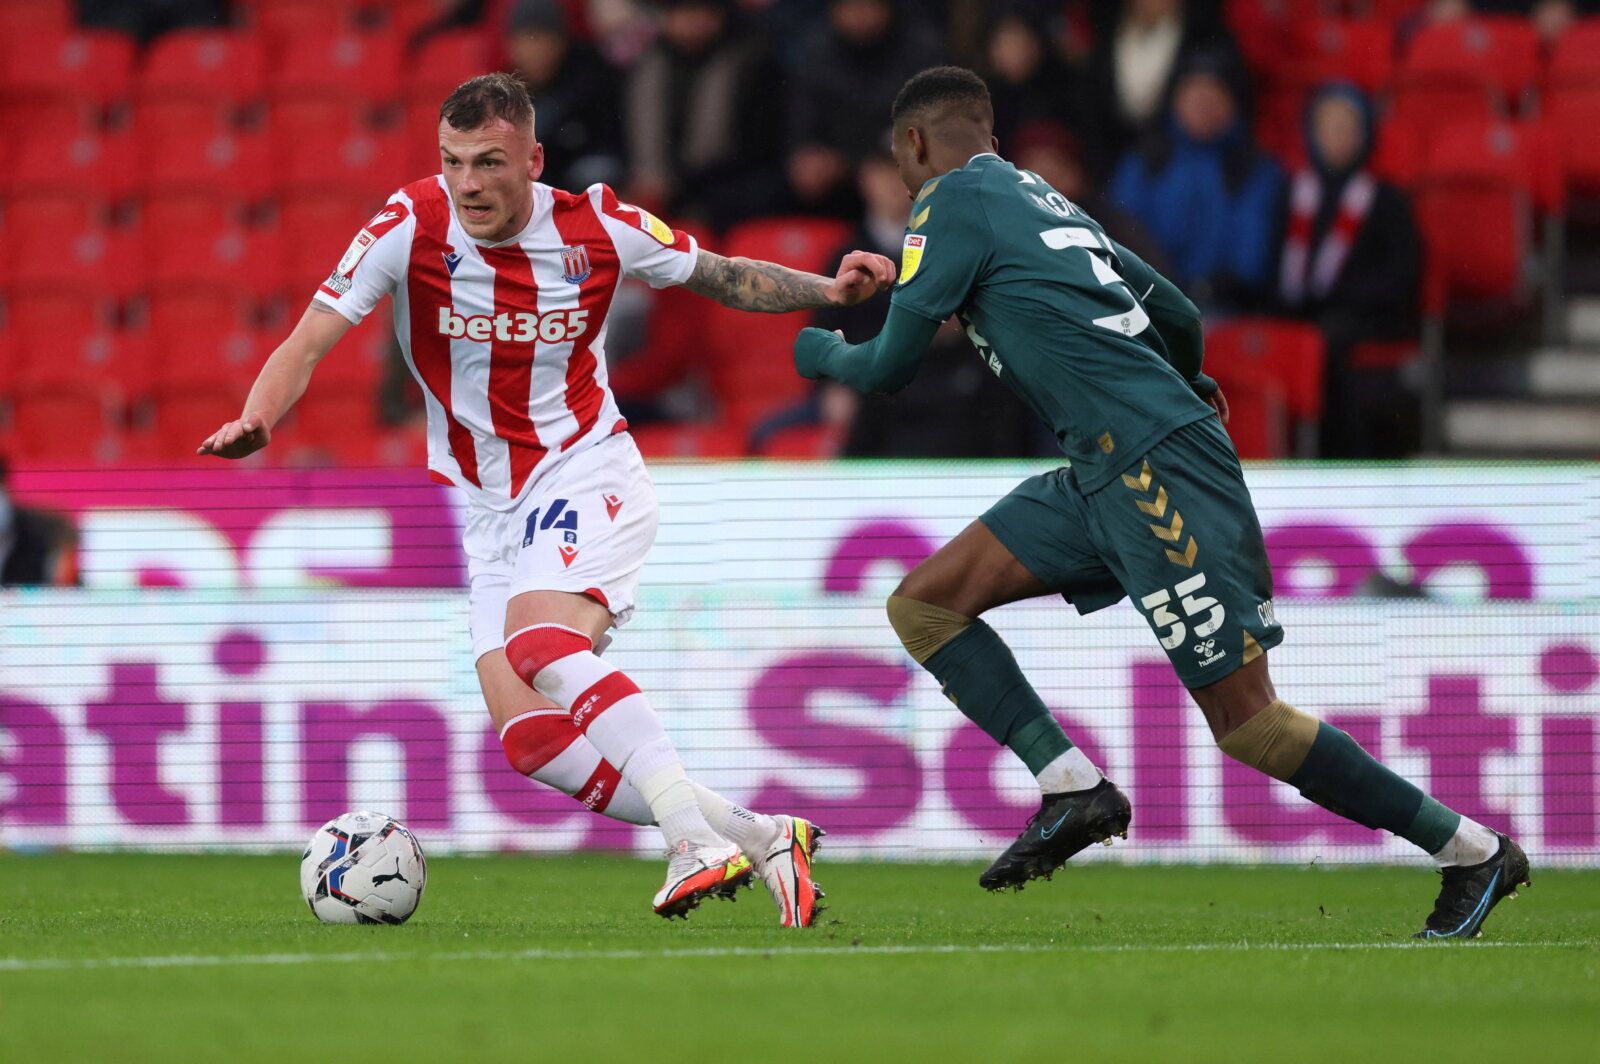 Soccer Football - Championship - Stoke City v Middlesbrough - bet365 Stadium, Stoke-on-Trent, Britain - December 11, 2021  Stoke City's Josh Tymon in action with Middlesbrough's Isaiah Jones  Action Images/John Clifton  EDITORIAL USE ONLY. No use with unauthorized audio, video, data, fixture lists, club/league logos or 